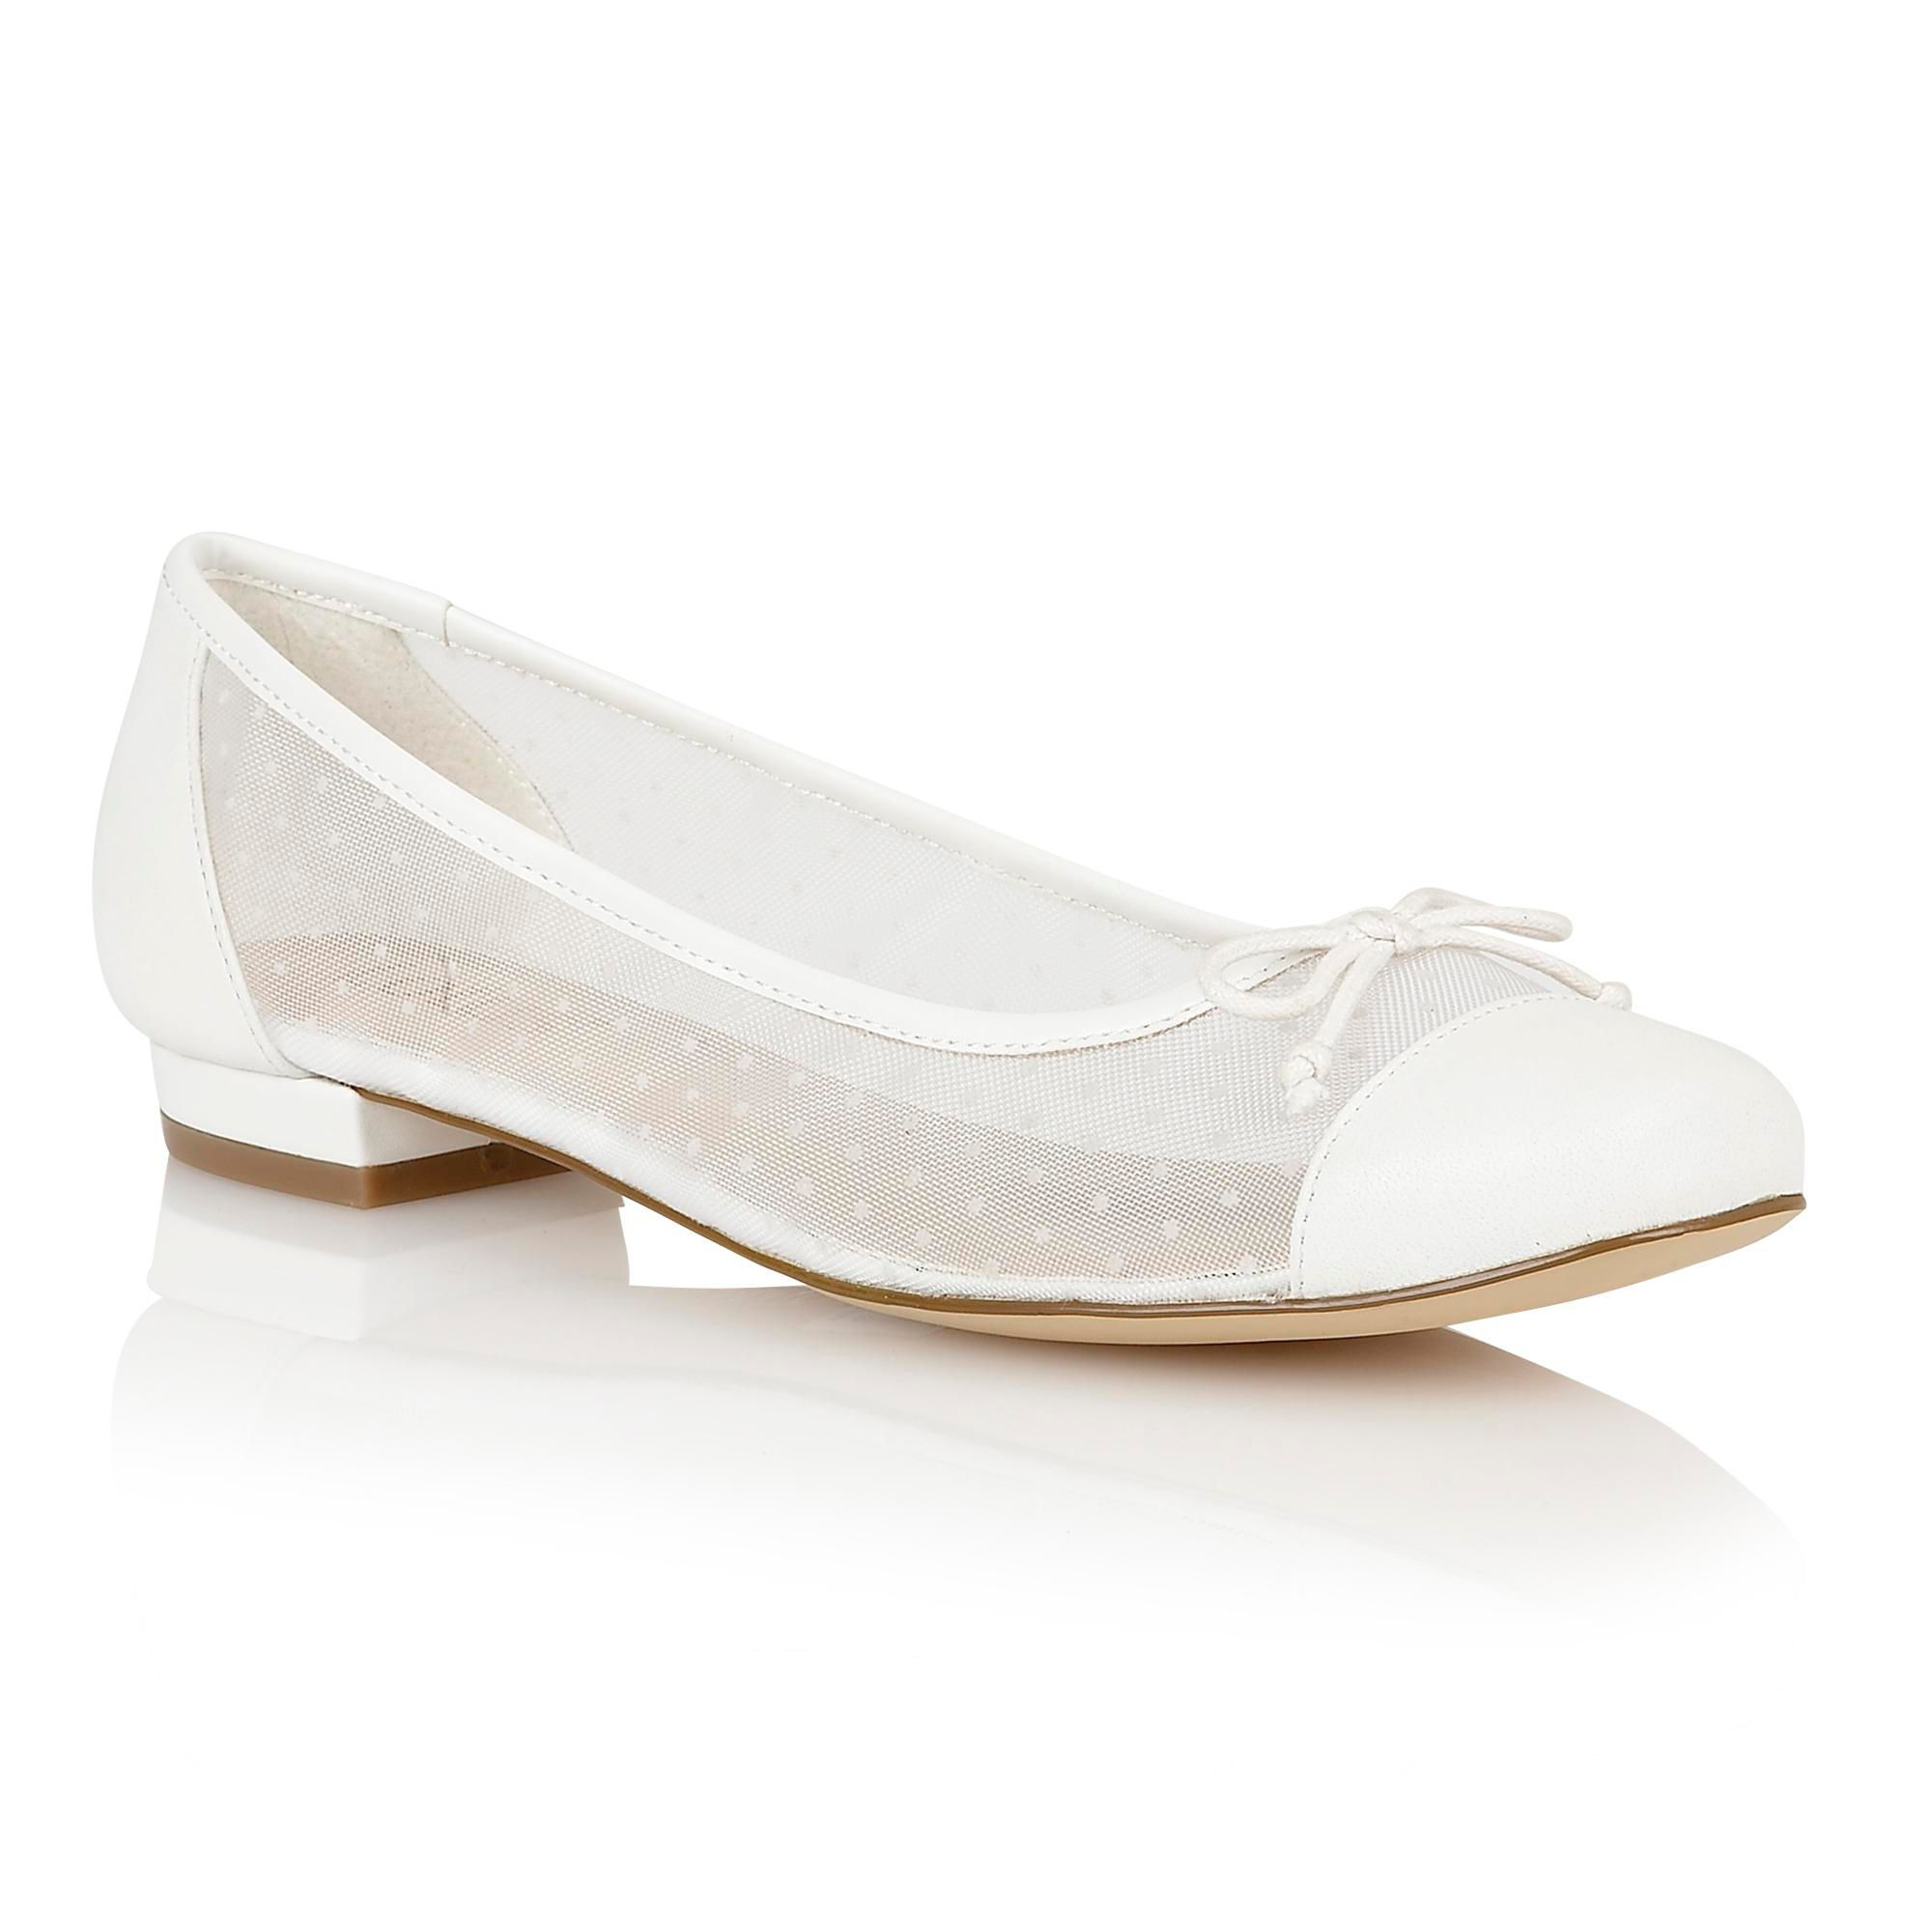 Lotus Damsel Flat Shoes in White | Lyst